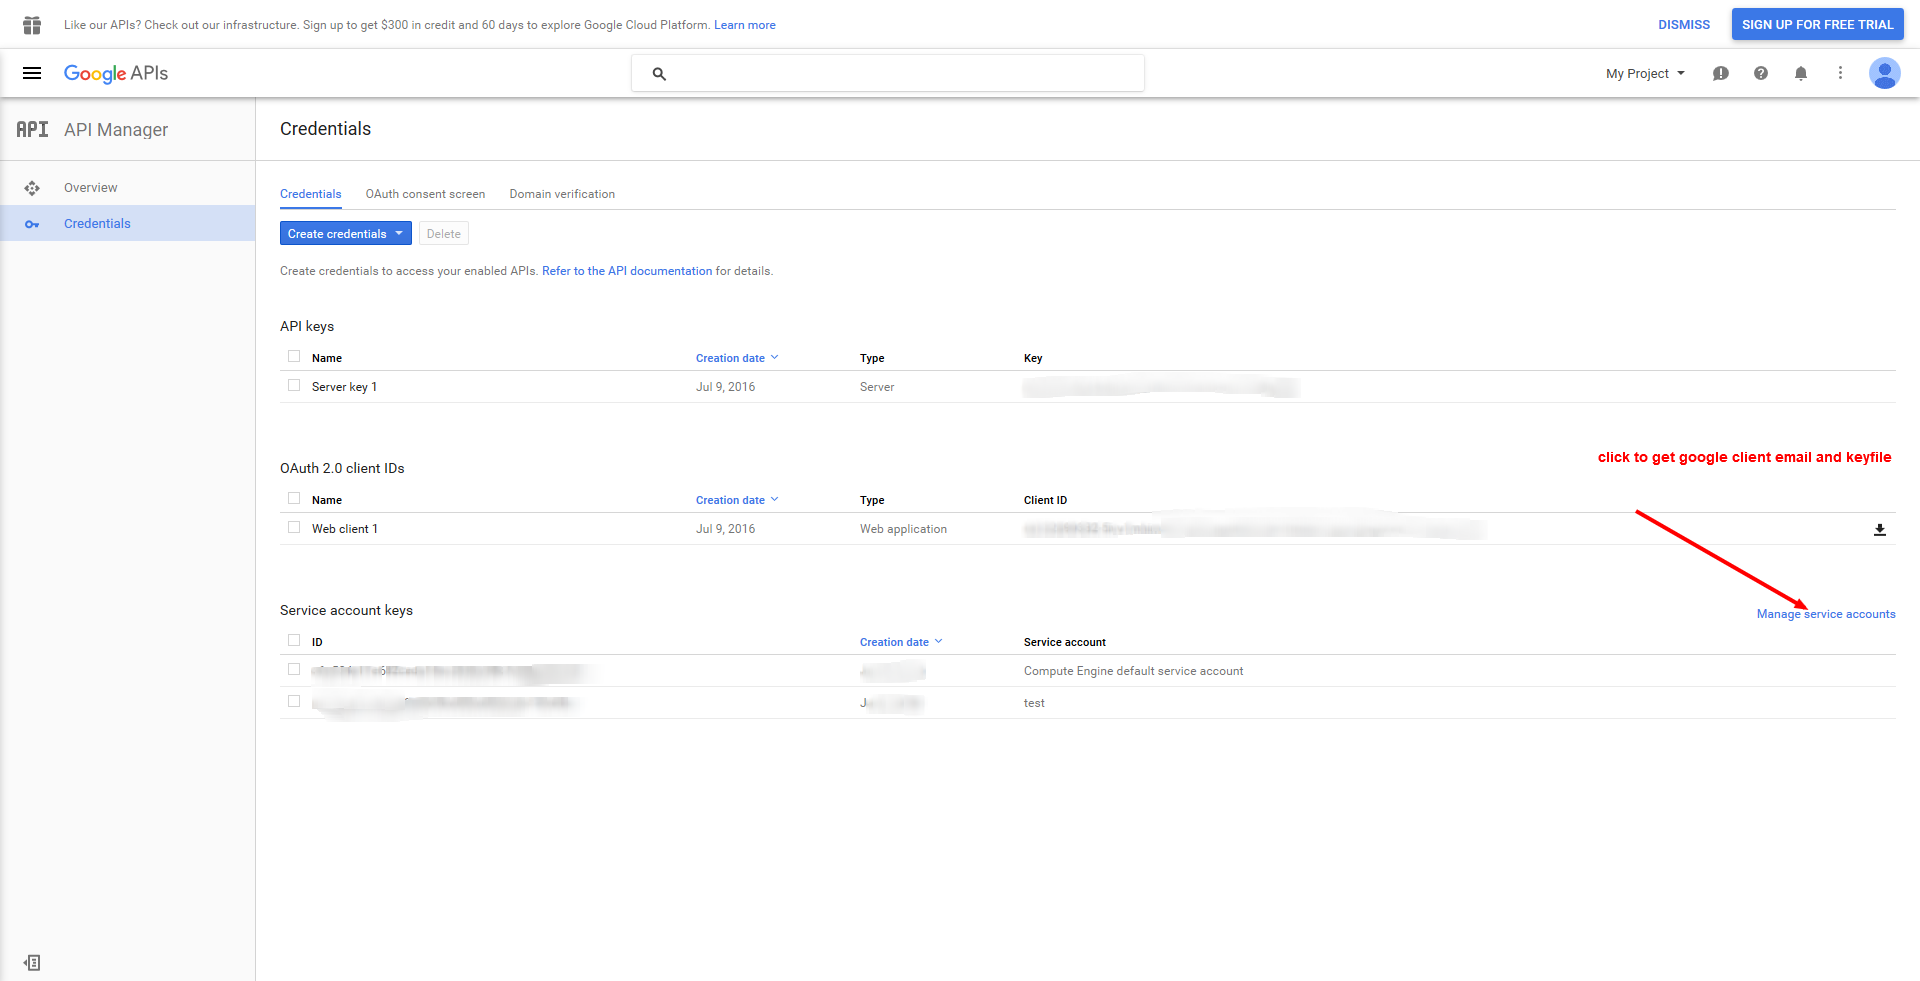 Click on manage service accounts to get google client ID and key file.